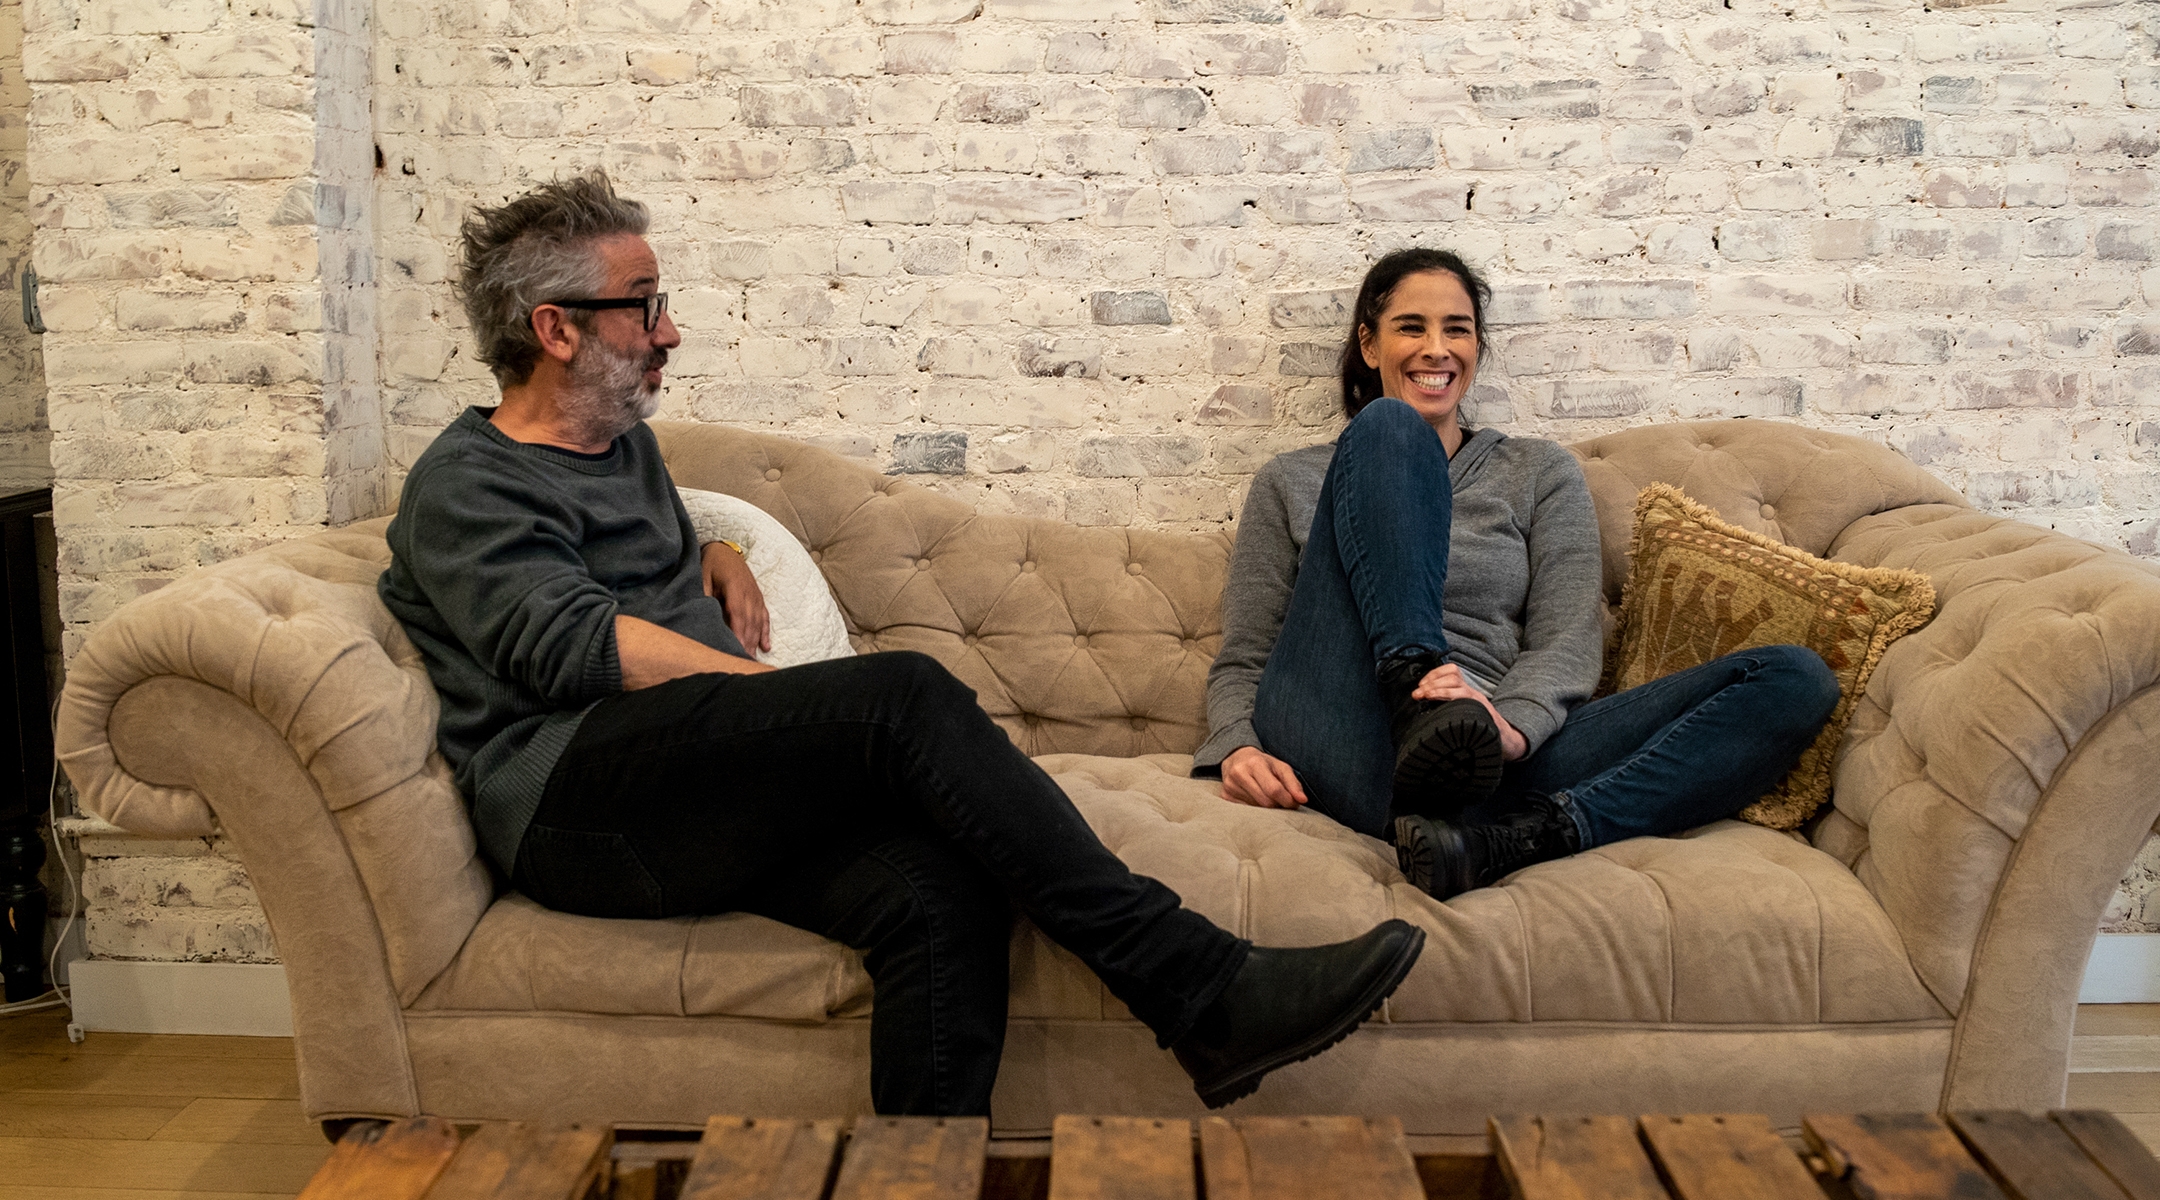 Sarah Silverman is one of several Jewish stars who feature in David Baddiel’s documentary, which discusses whether Jews lack allies in progressive spaces. (Channel 4)